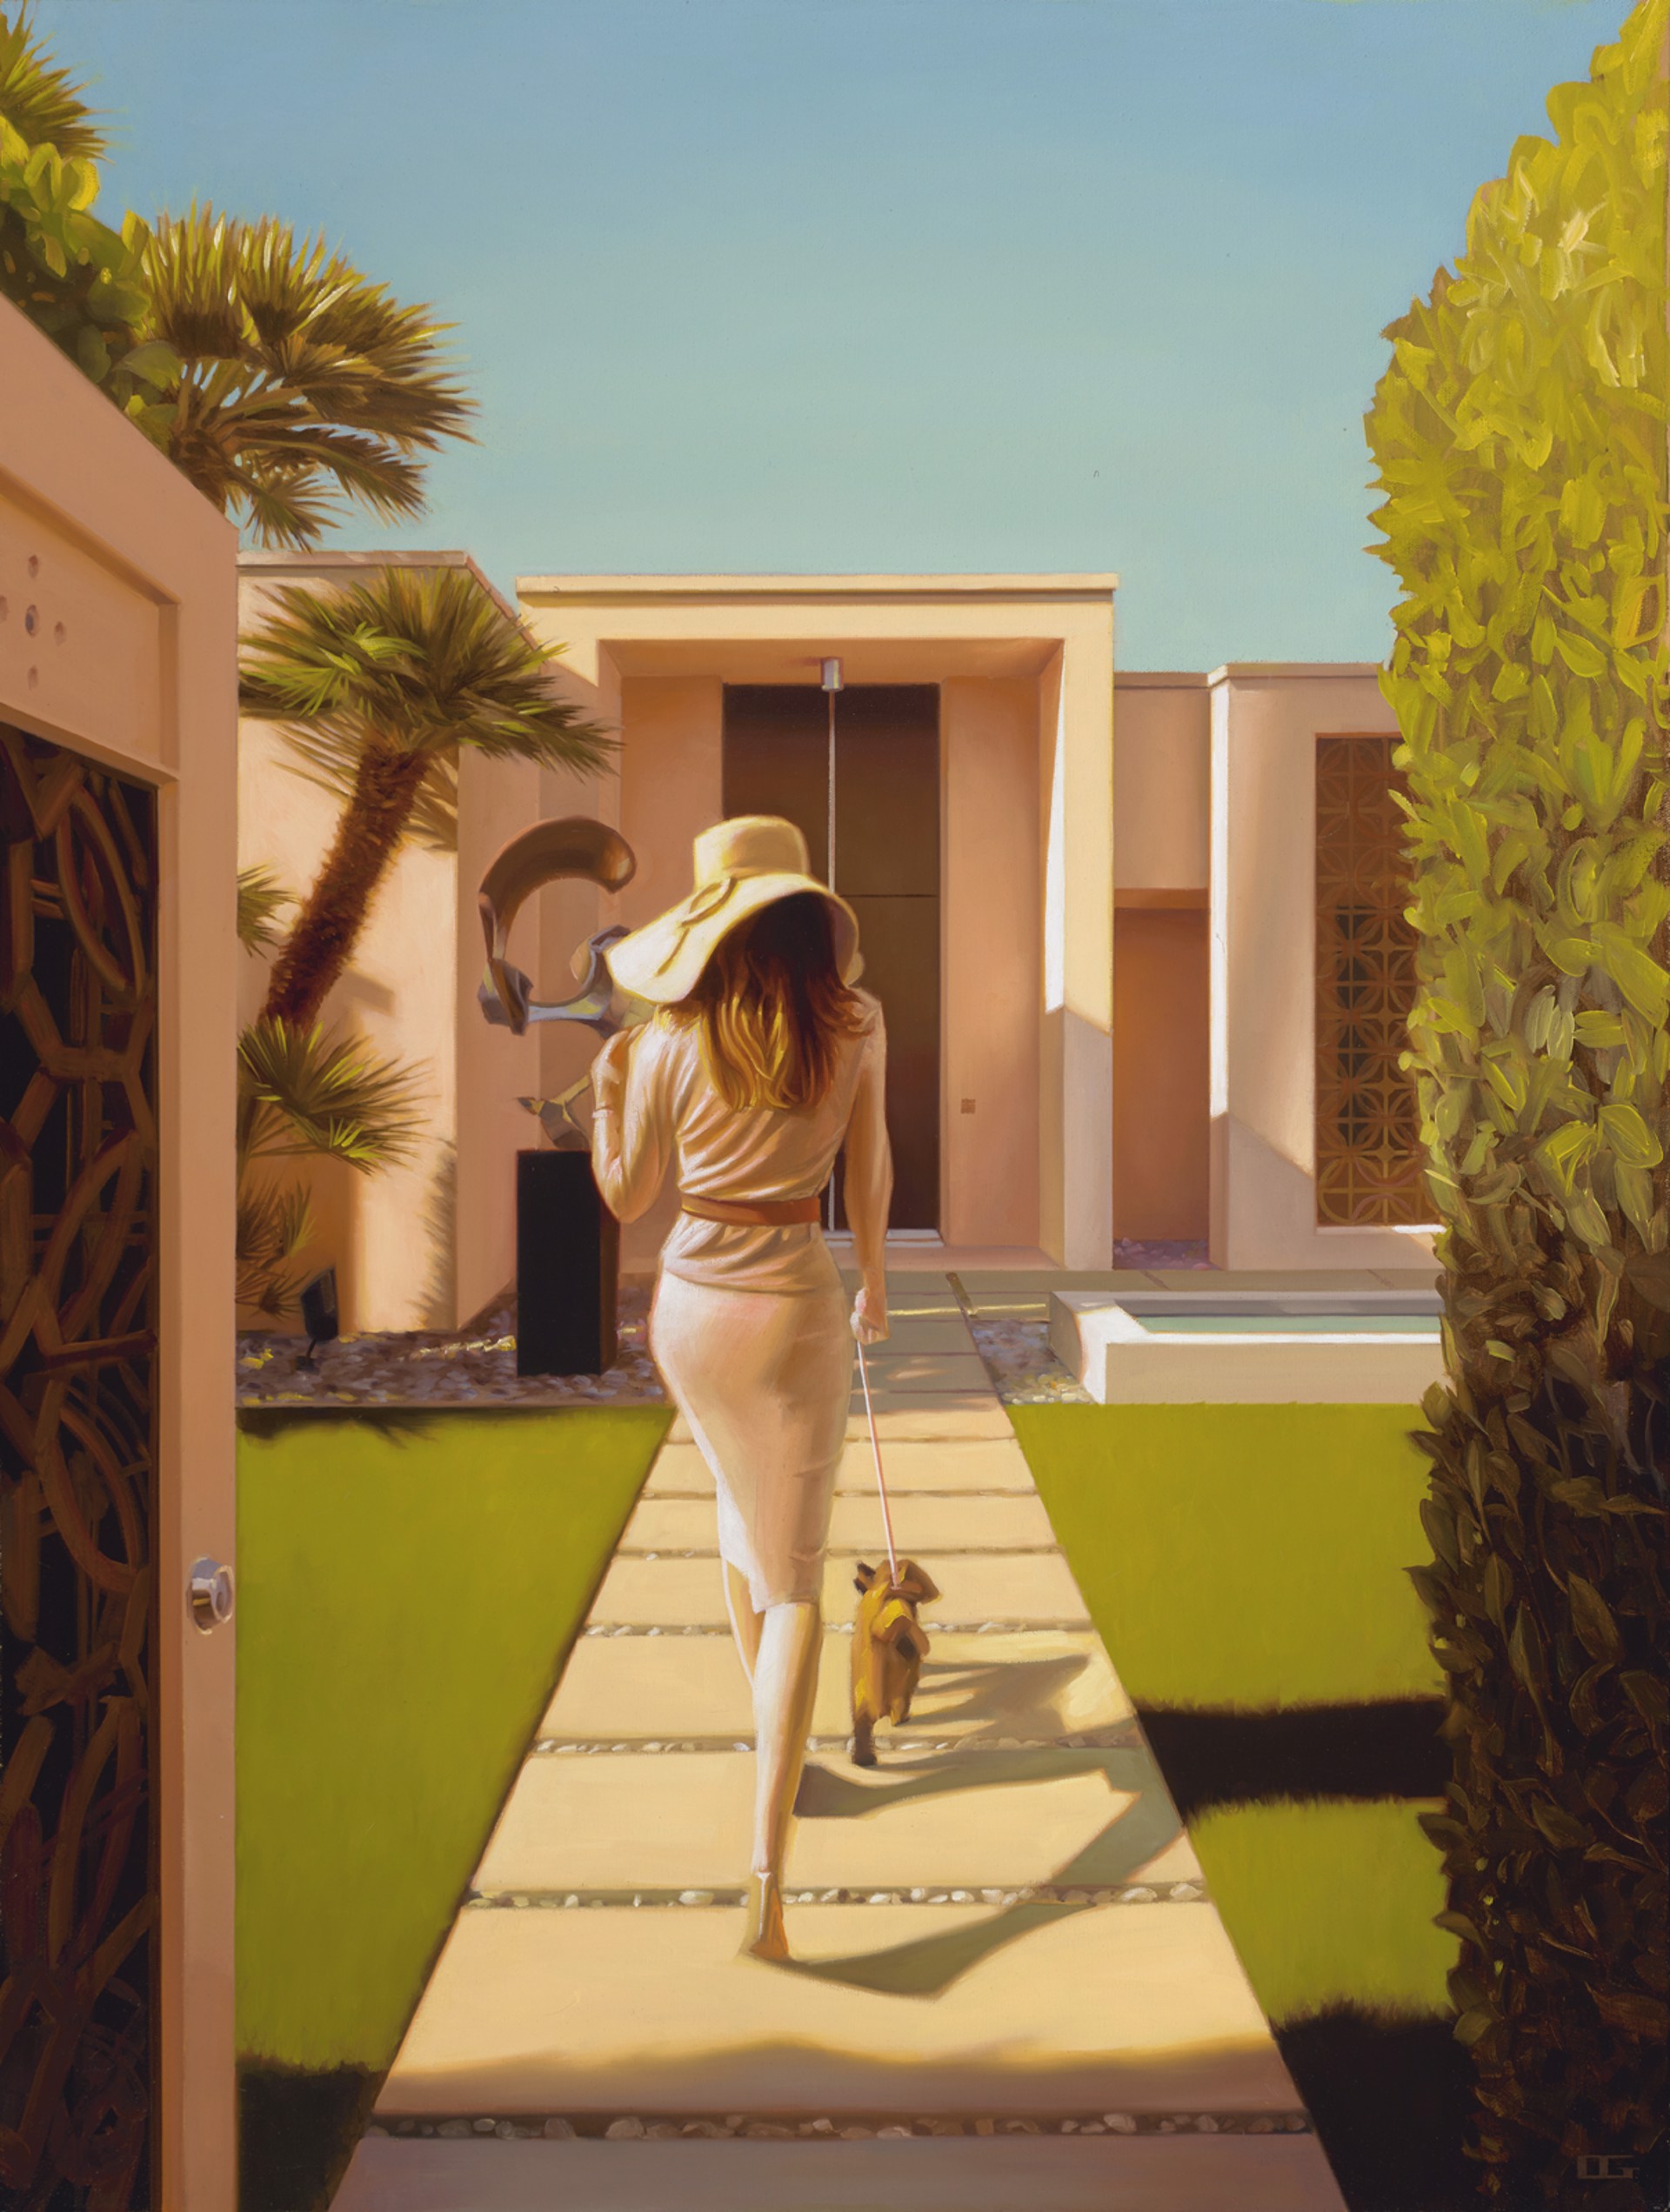 Great Strides by Carrie Graber